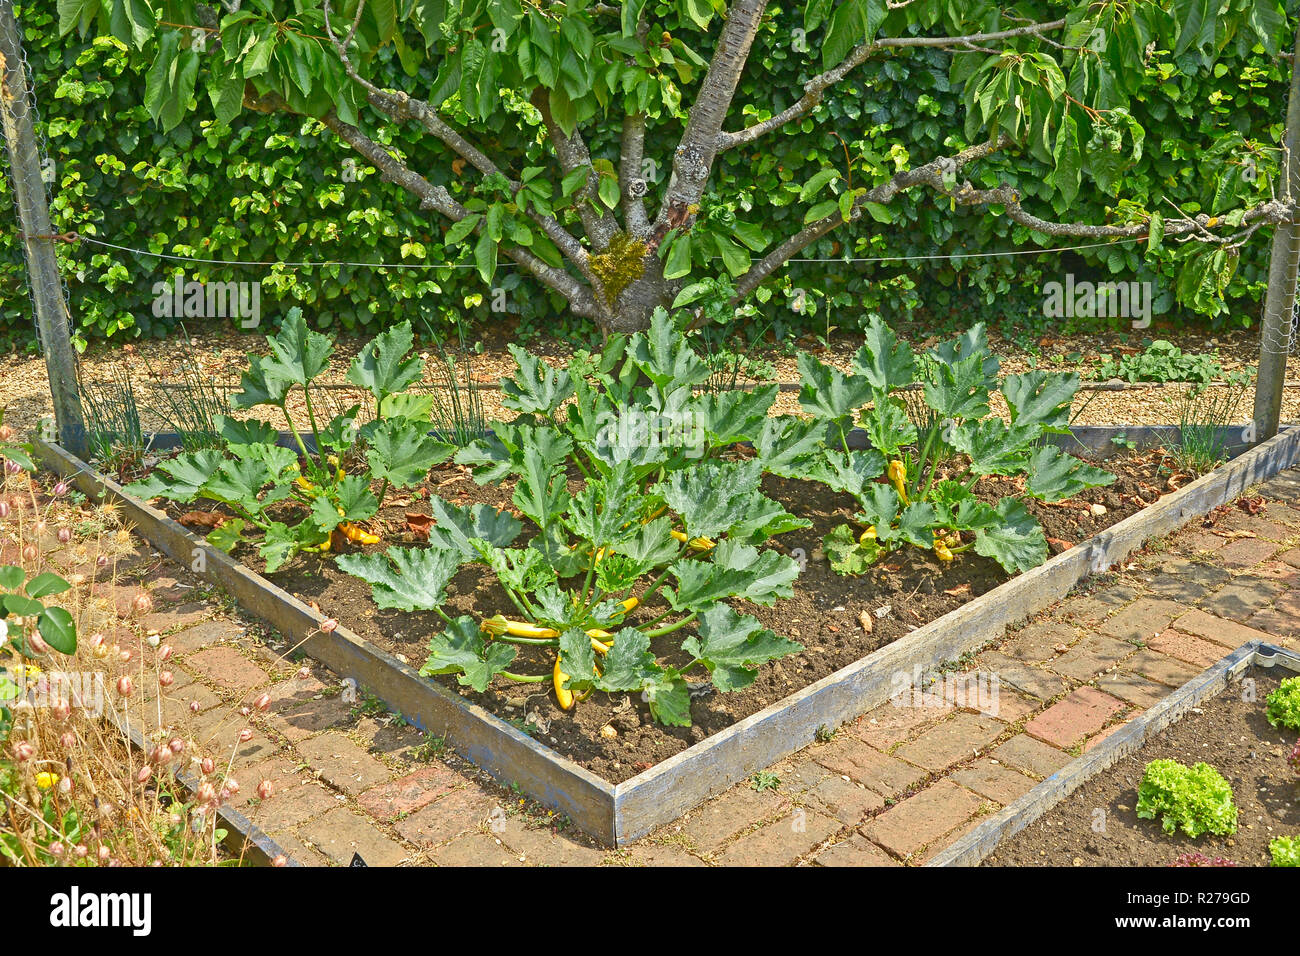 Courgette 'Soliel' plants in a enclose bed in a vegetable garden Stock Photo